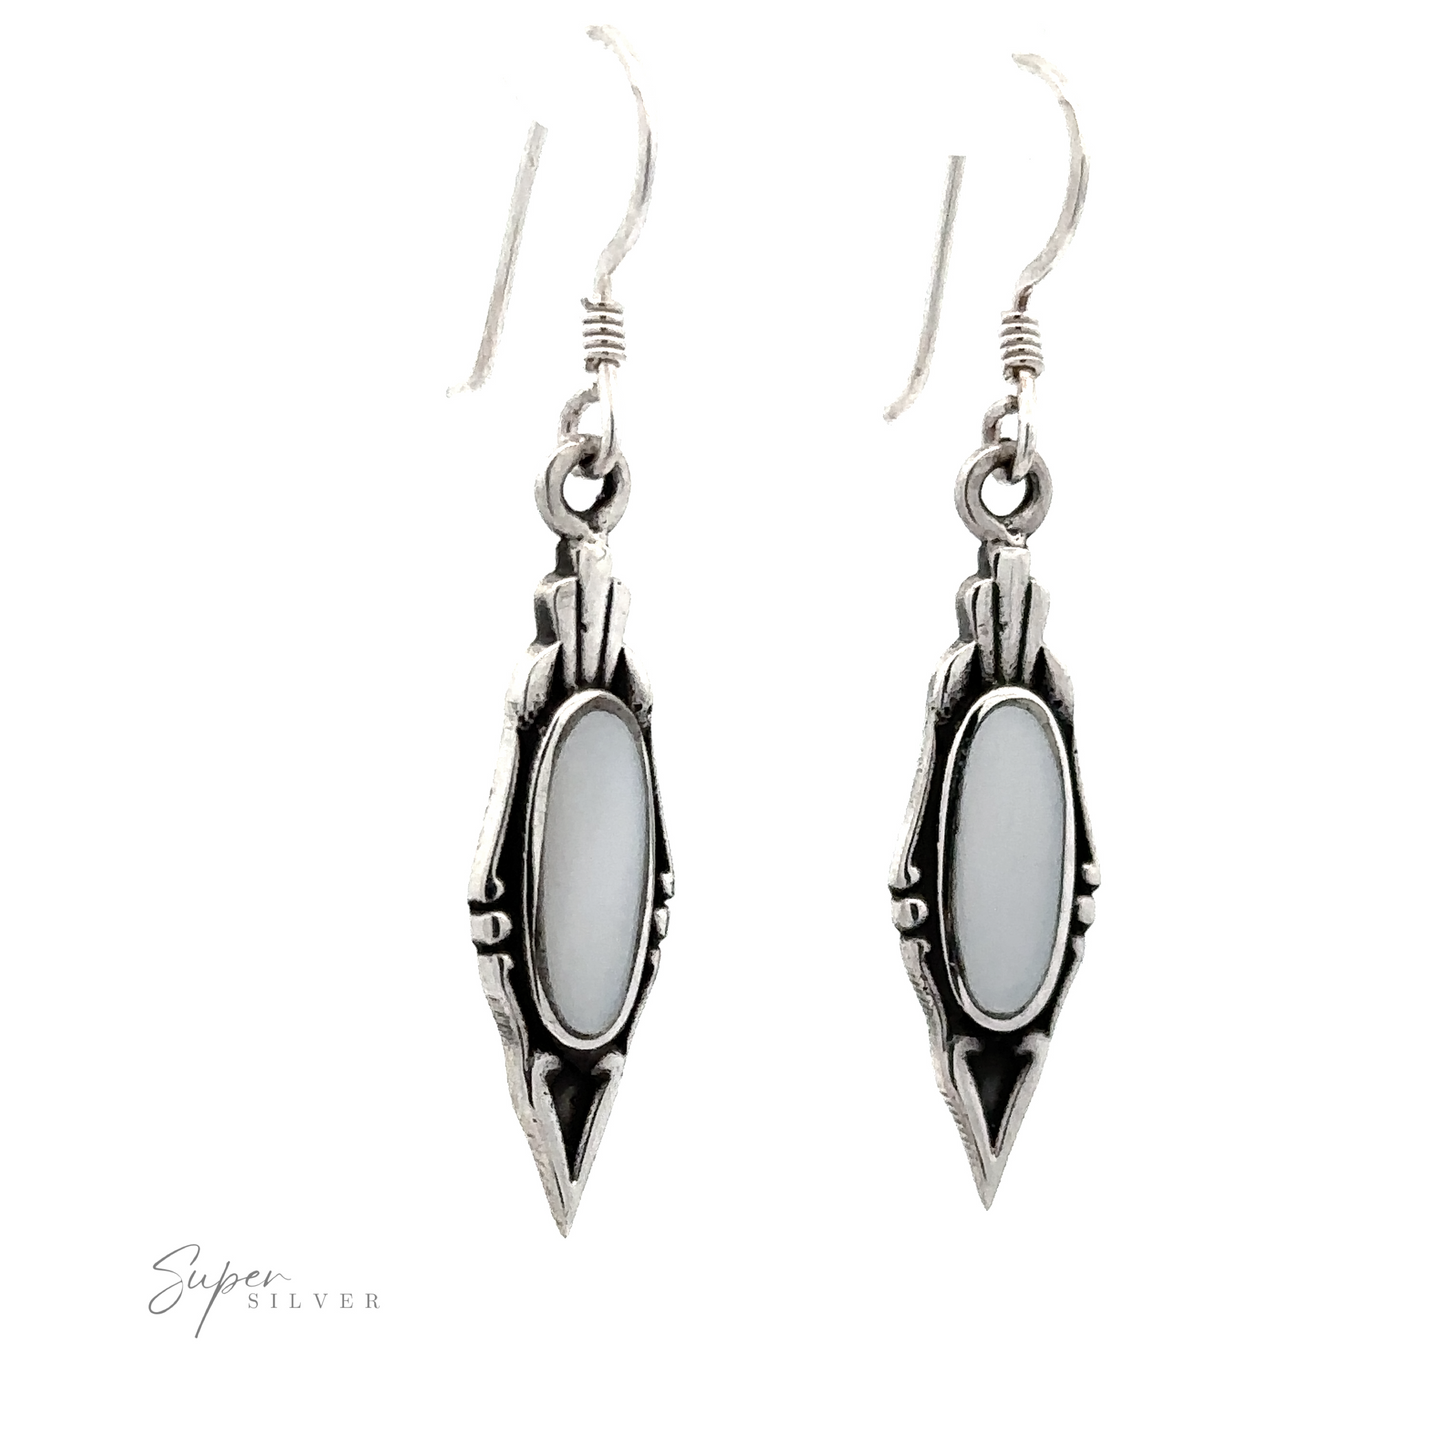 
                  
                    A pair of Elegant Inlaid Earrings with Oval Stone, featuring intricate vintage design metalwork. Hook fastening. Brand name "Super Silver" visible in the corner.
                  
                